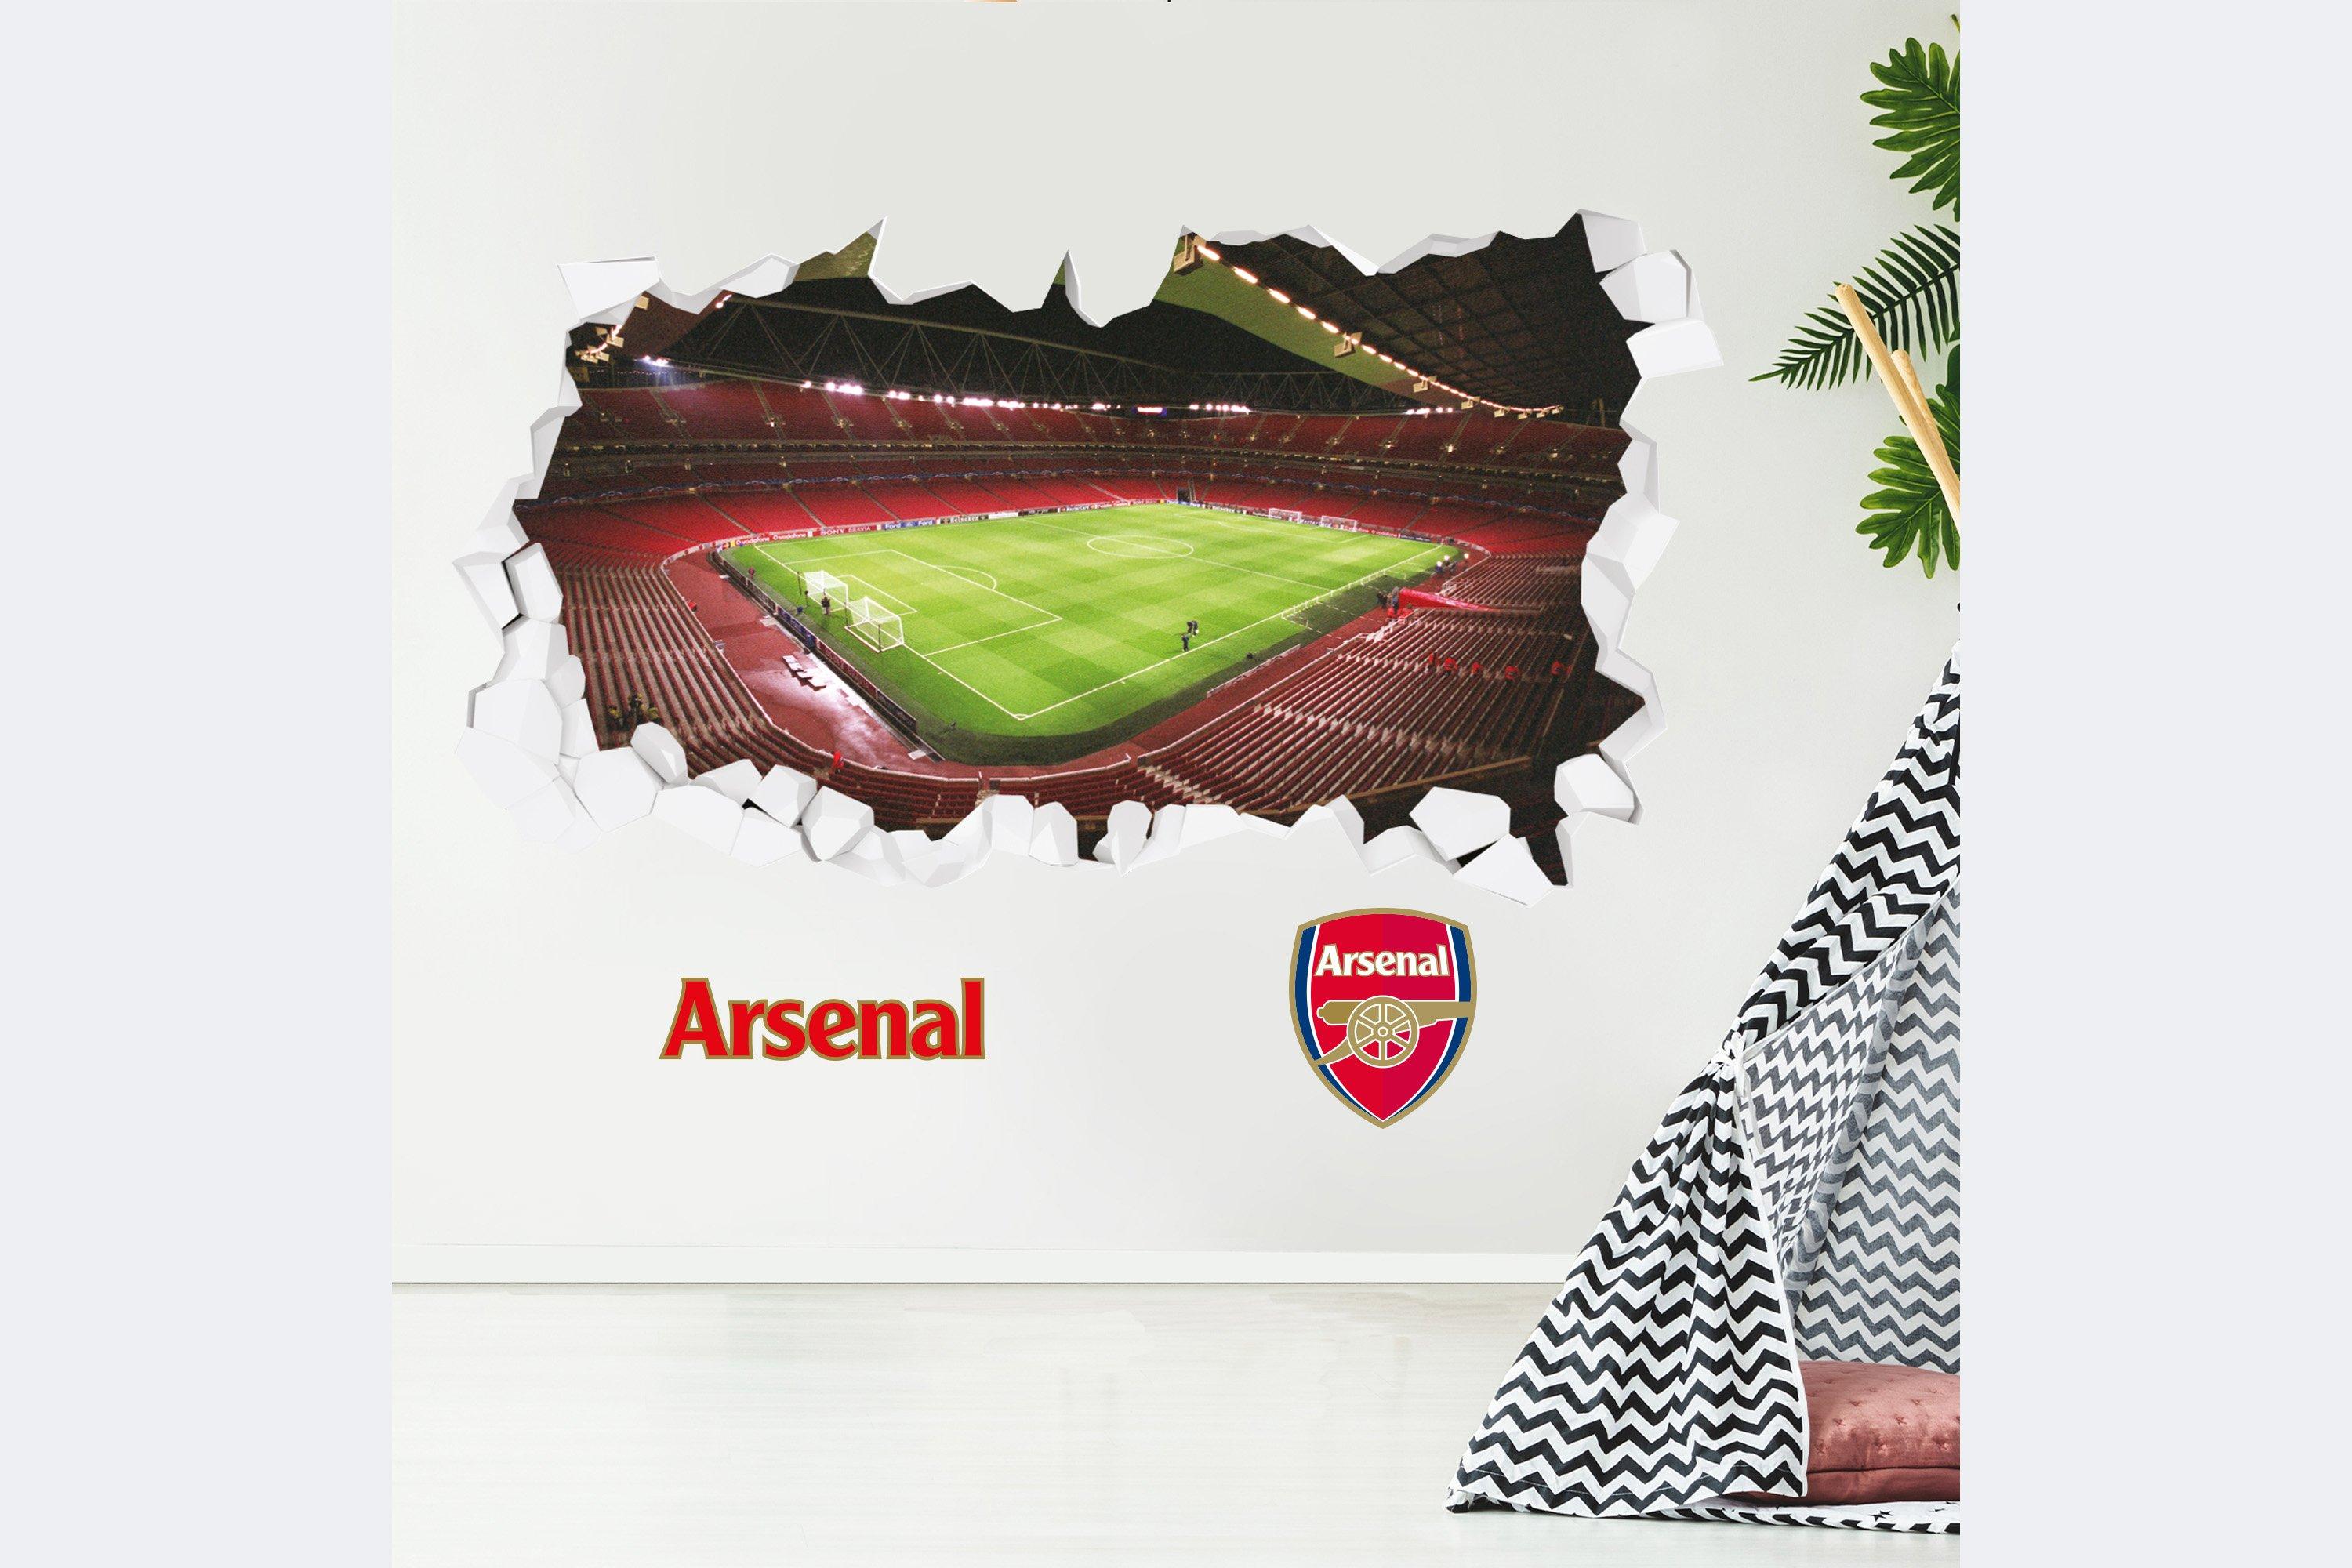 Arsenal on the wall sticker decal 5 x 3 